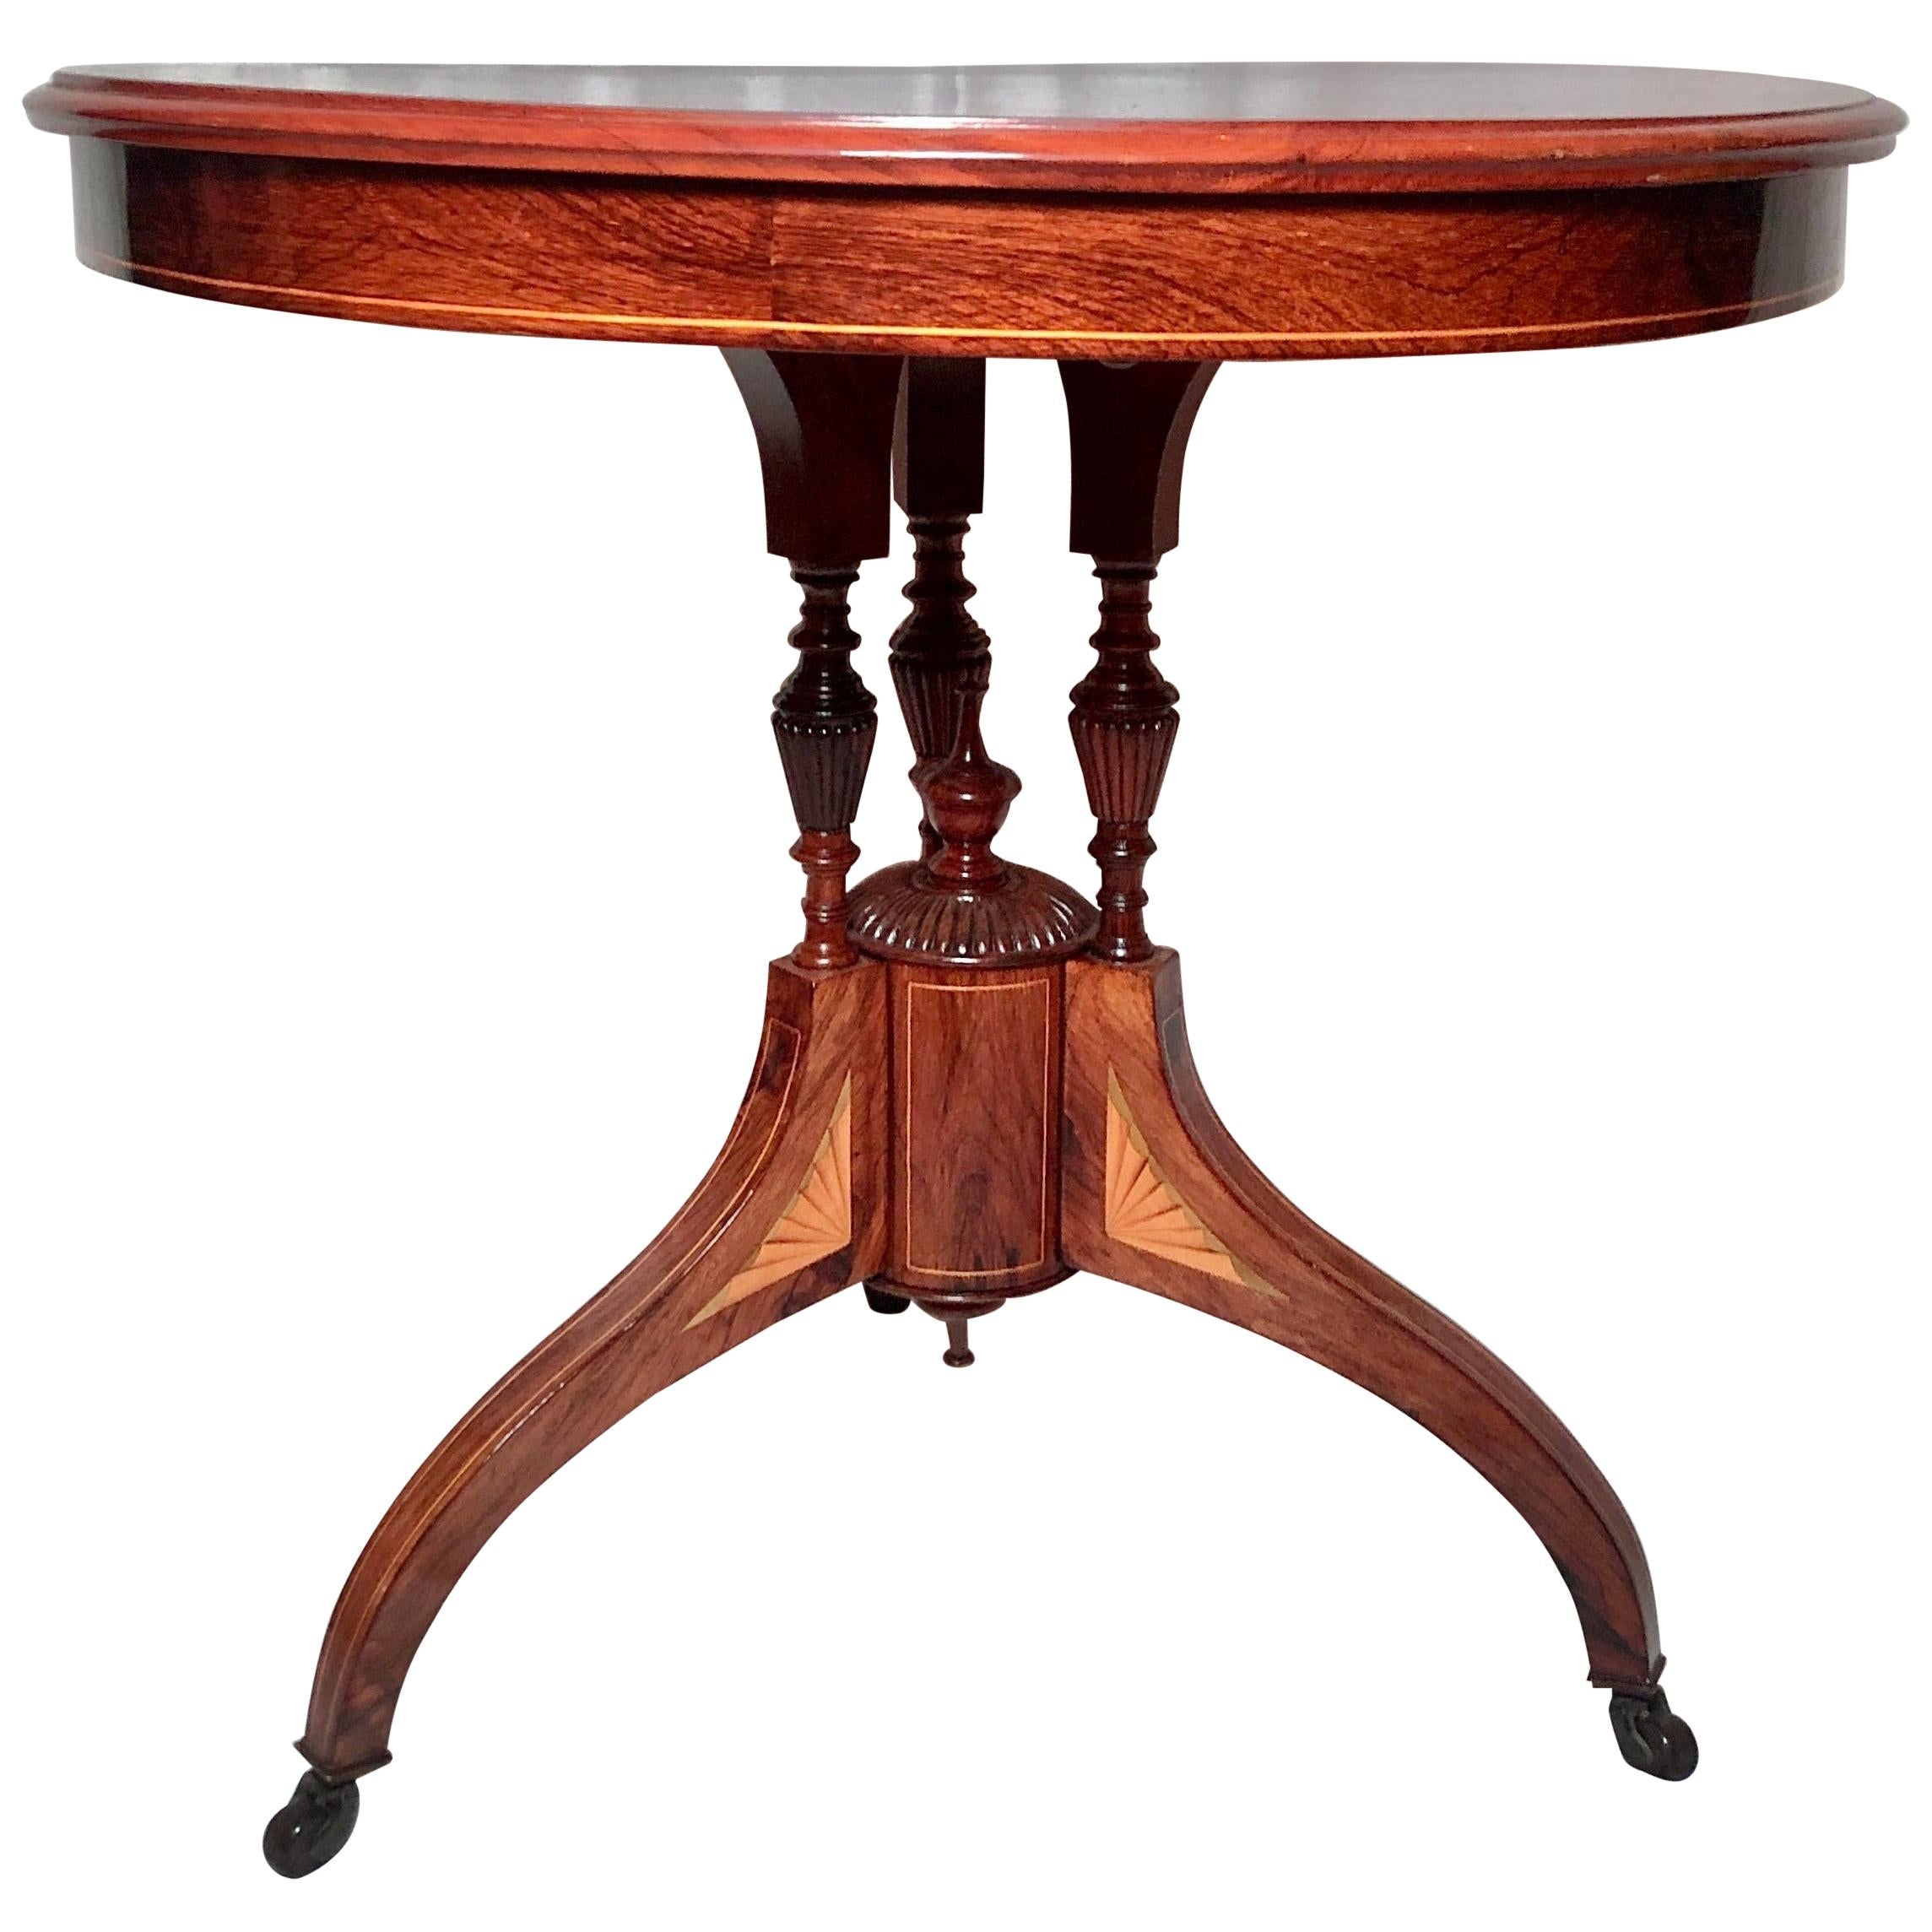 Antique English Victorian Rosewood Table with Inlay, Circa 1860- 1870 For Sale